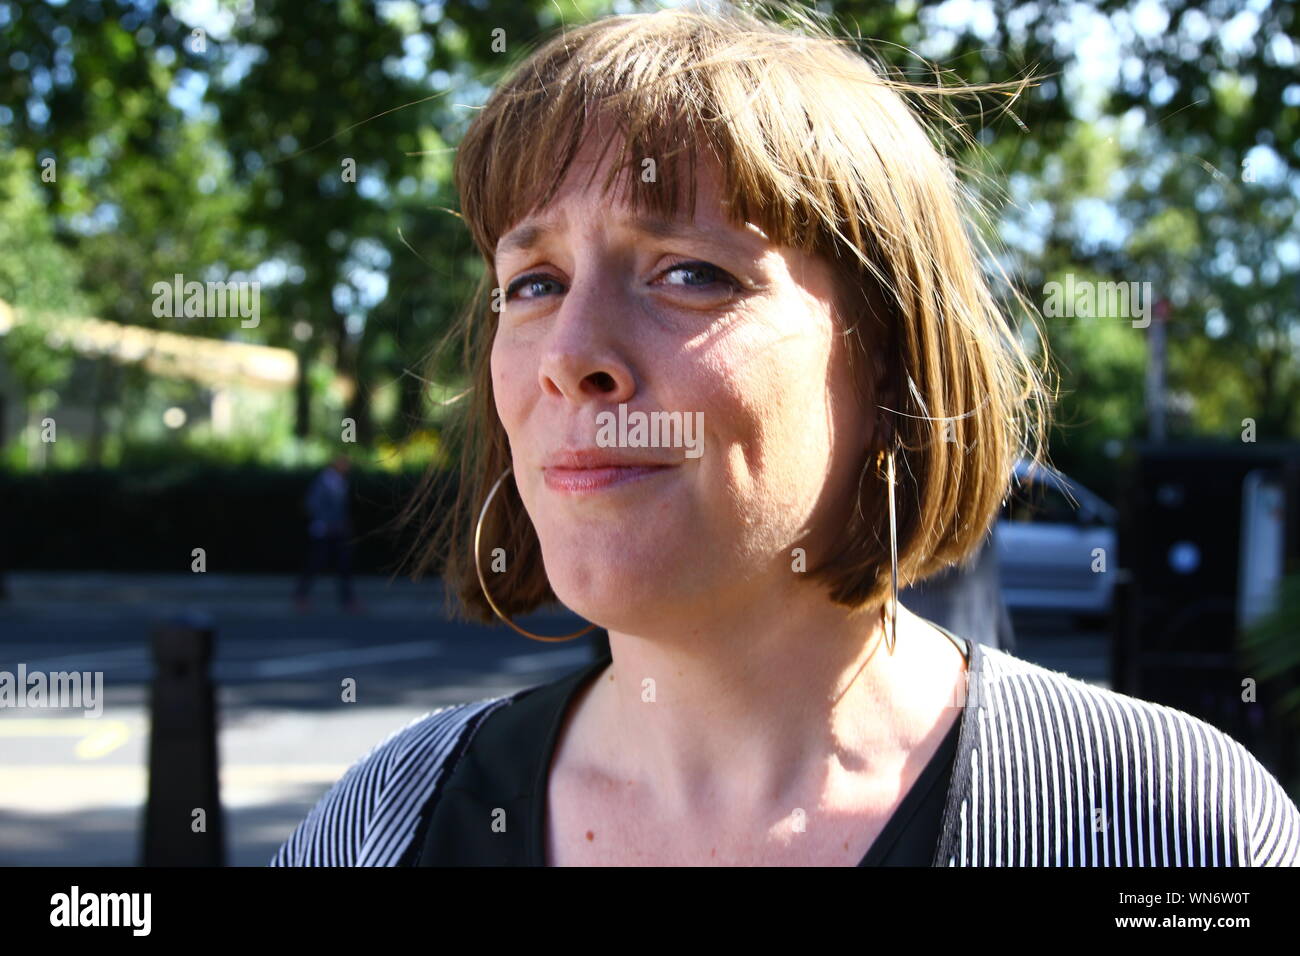 JESS PHILLIPS MP AT COLLEGE GREEN, WESTMINSTER ON 5TH SEPTEMBER 2019. LABOUR PARTY MPS.  POLITICS. BRITISH POLITICIANS. UK POLITICS. MPS. JESS PHILLIPS IS MP FOR BIRMINGHAM YARDLEY CONSTITUENCY. JESSICA ROSE PHILLIPS. RUSSELL MOORE PORTFOLIO PAGE. Stock Photo